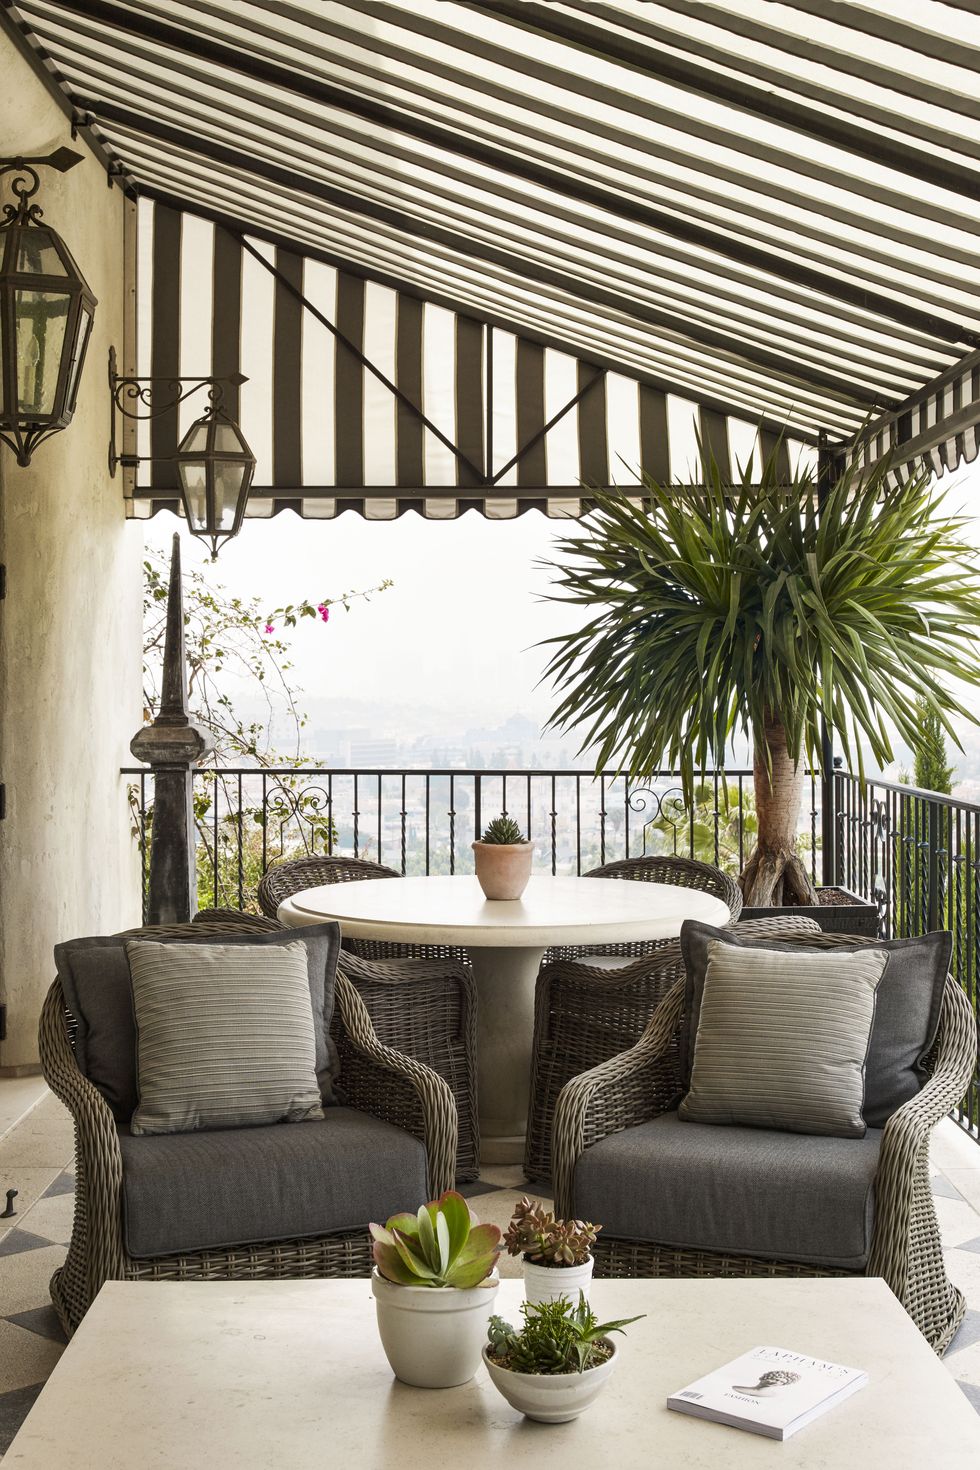 <p>Think of your porch or deck as a bonus room and dress it up with a traditional seating area and all the comforts of home. "Houses are expensive, so use every nook and cranny" to extend your space, says Ellen.</p><p><em>For similar: <strong>Awning,</strong> <a href="http://www.sunsetter.com/" target="_blank">sunsetter.com</a>. <strong>Havana lounge chairs,</strong> <a href="https://www.gloster.com/gla/" target="_blank">gloster.com</a>. <strong>Sunbrella Solid Indoor/Outdoor pillows,</strong> from $40 each, <a href="http://www.potterybarn.com/" target="_blank">potterybarn.com</a>. </em><em><strong>French Kitchen Round Bistro table,</strong> $899, <a href="http://www.crateandbarrel.com/" target="_blank">crateandbarrel.com</a>.</em></p>